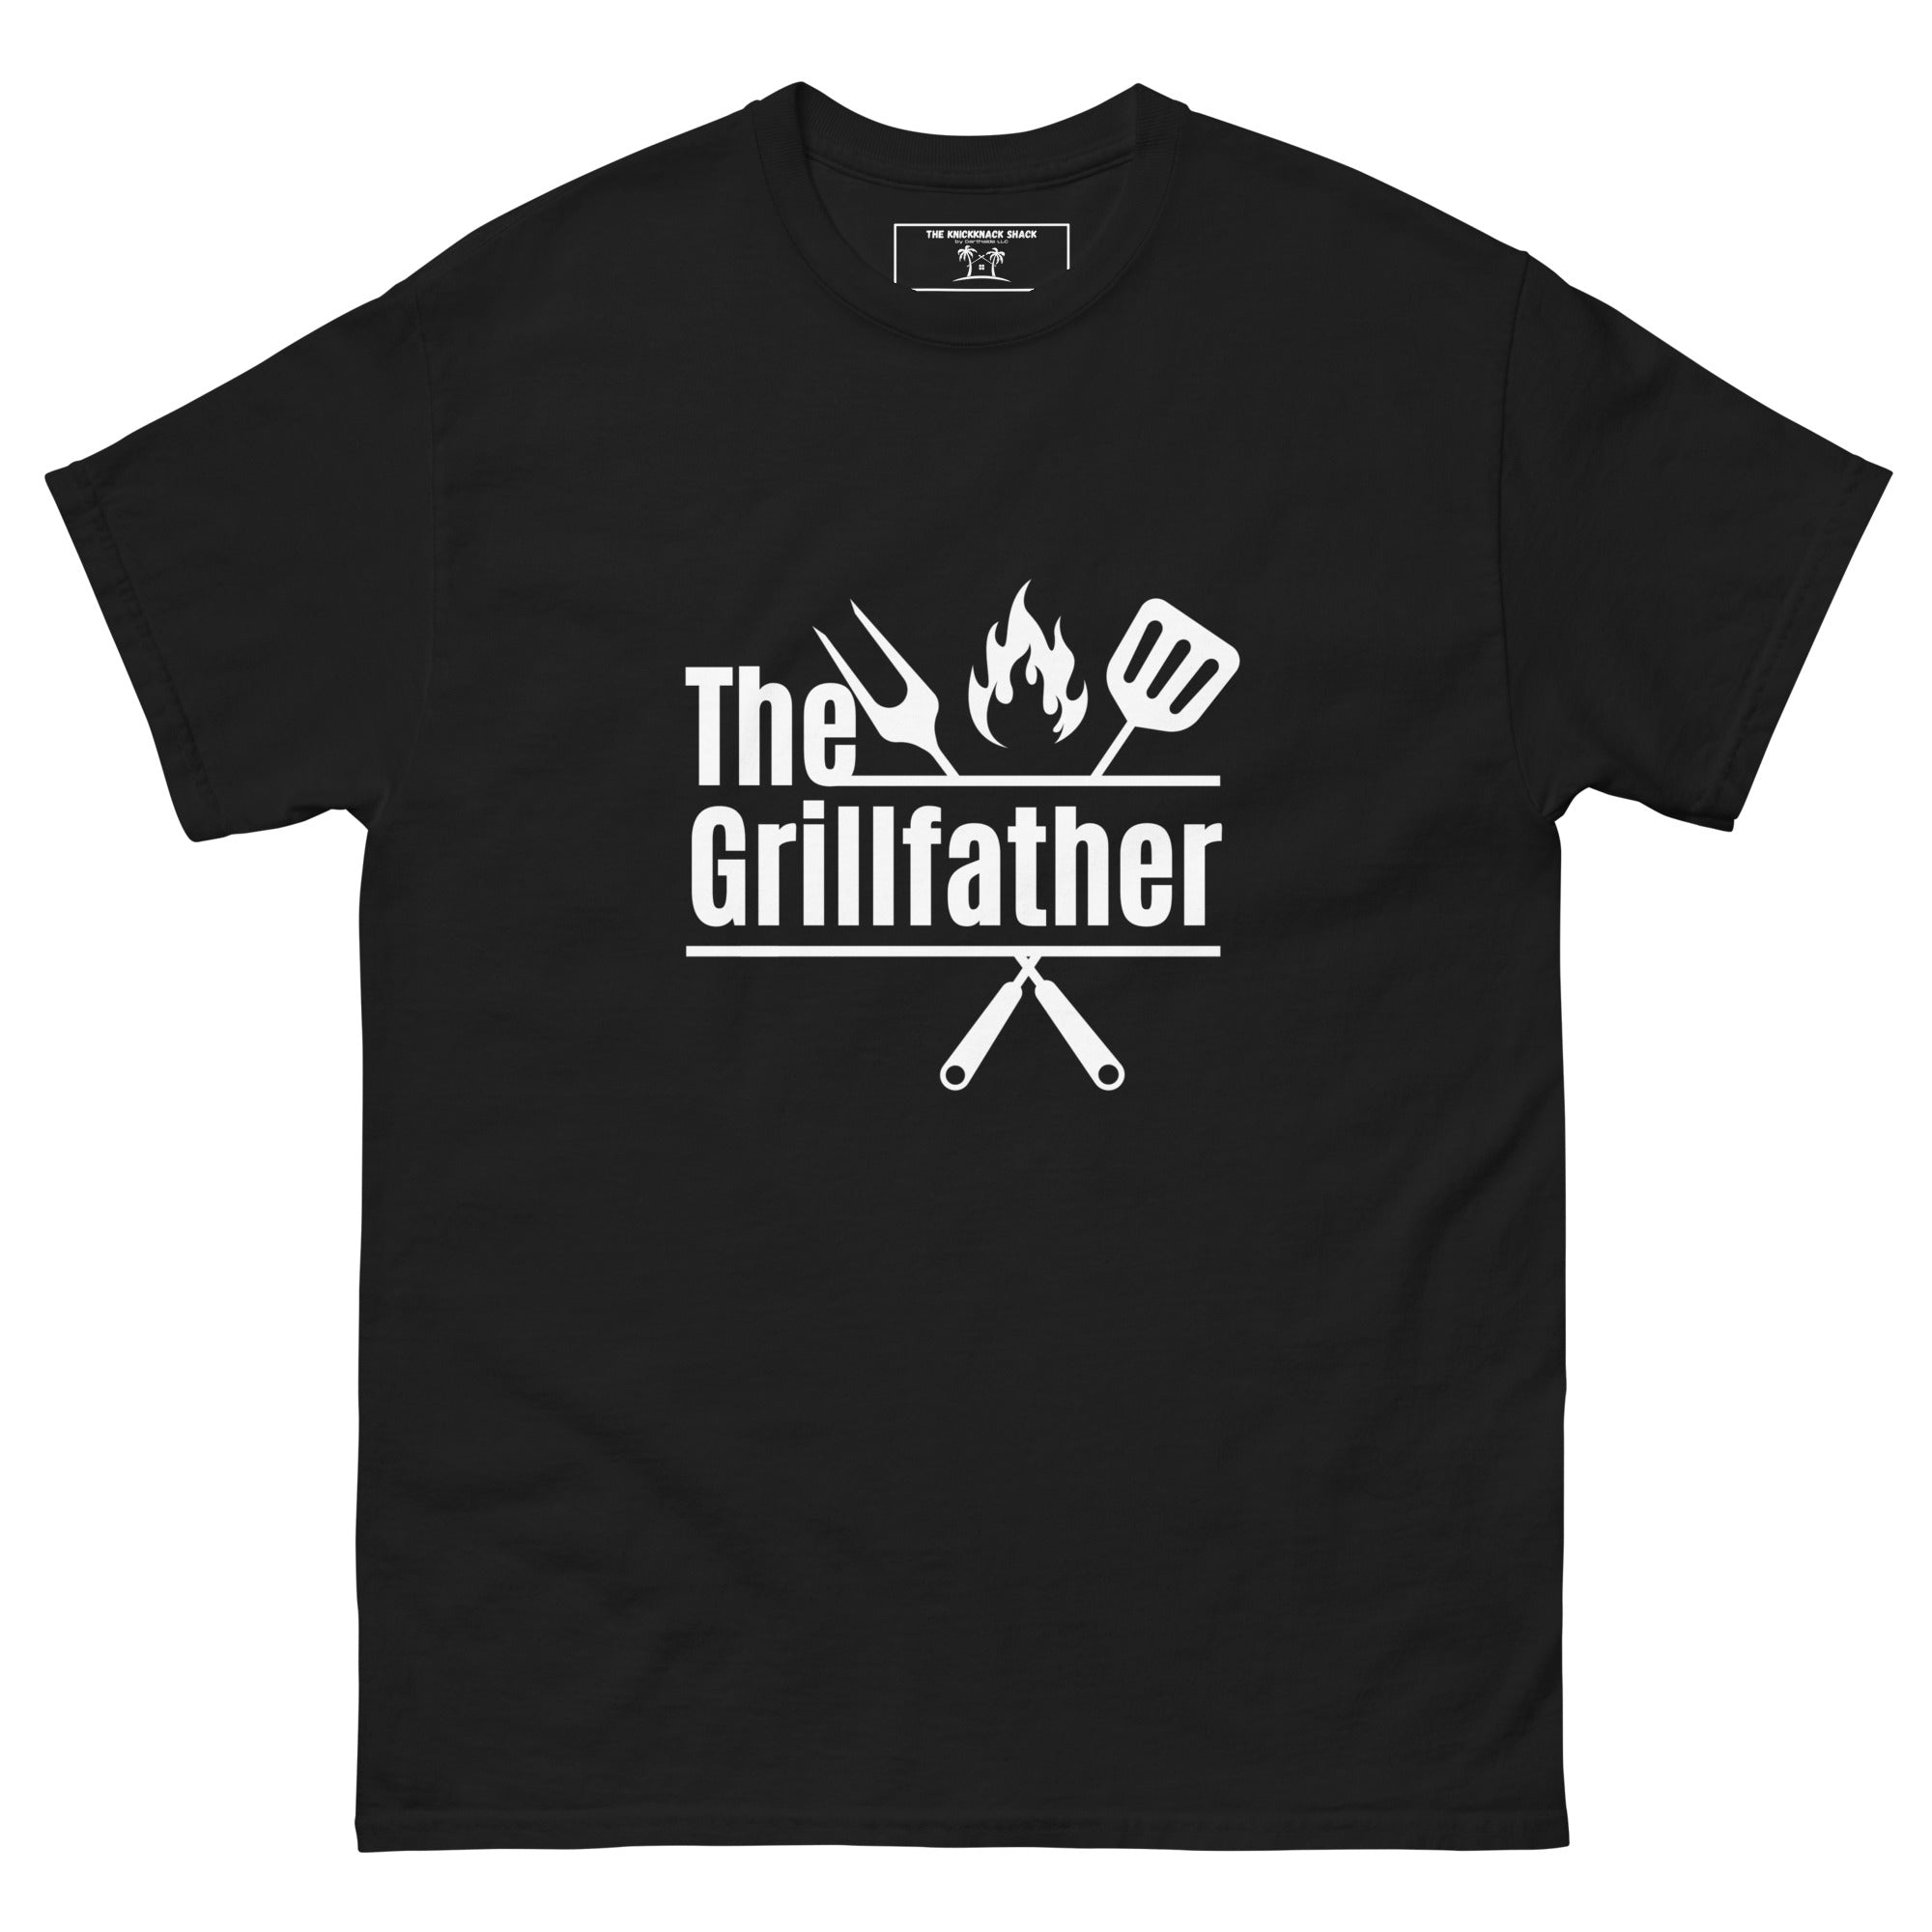 Classic Tee - The Grillfather (Dark Colors)